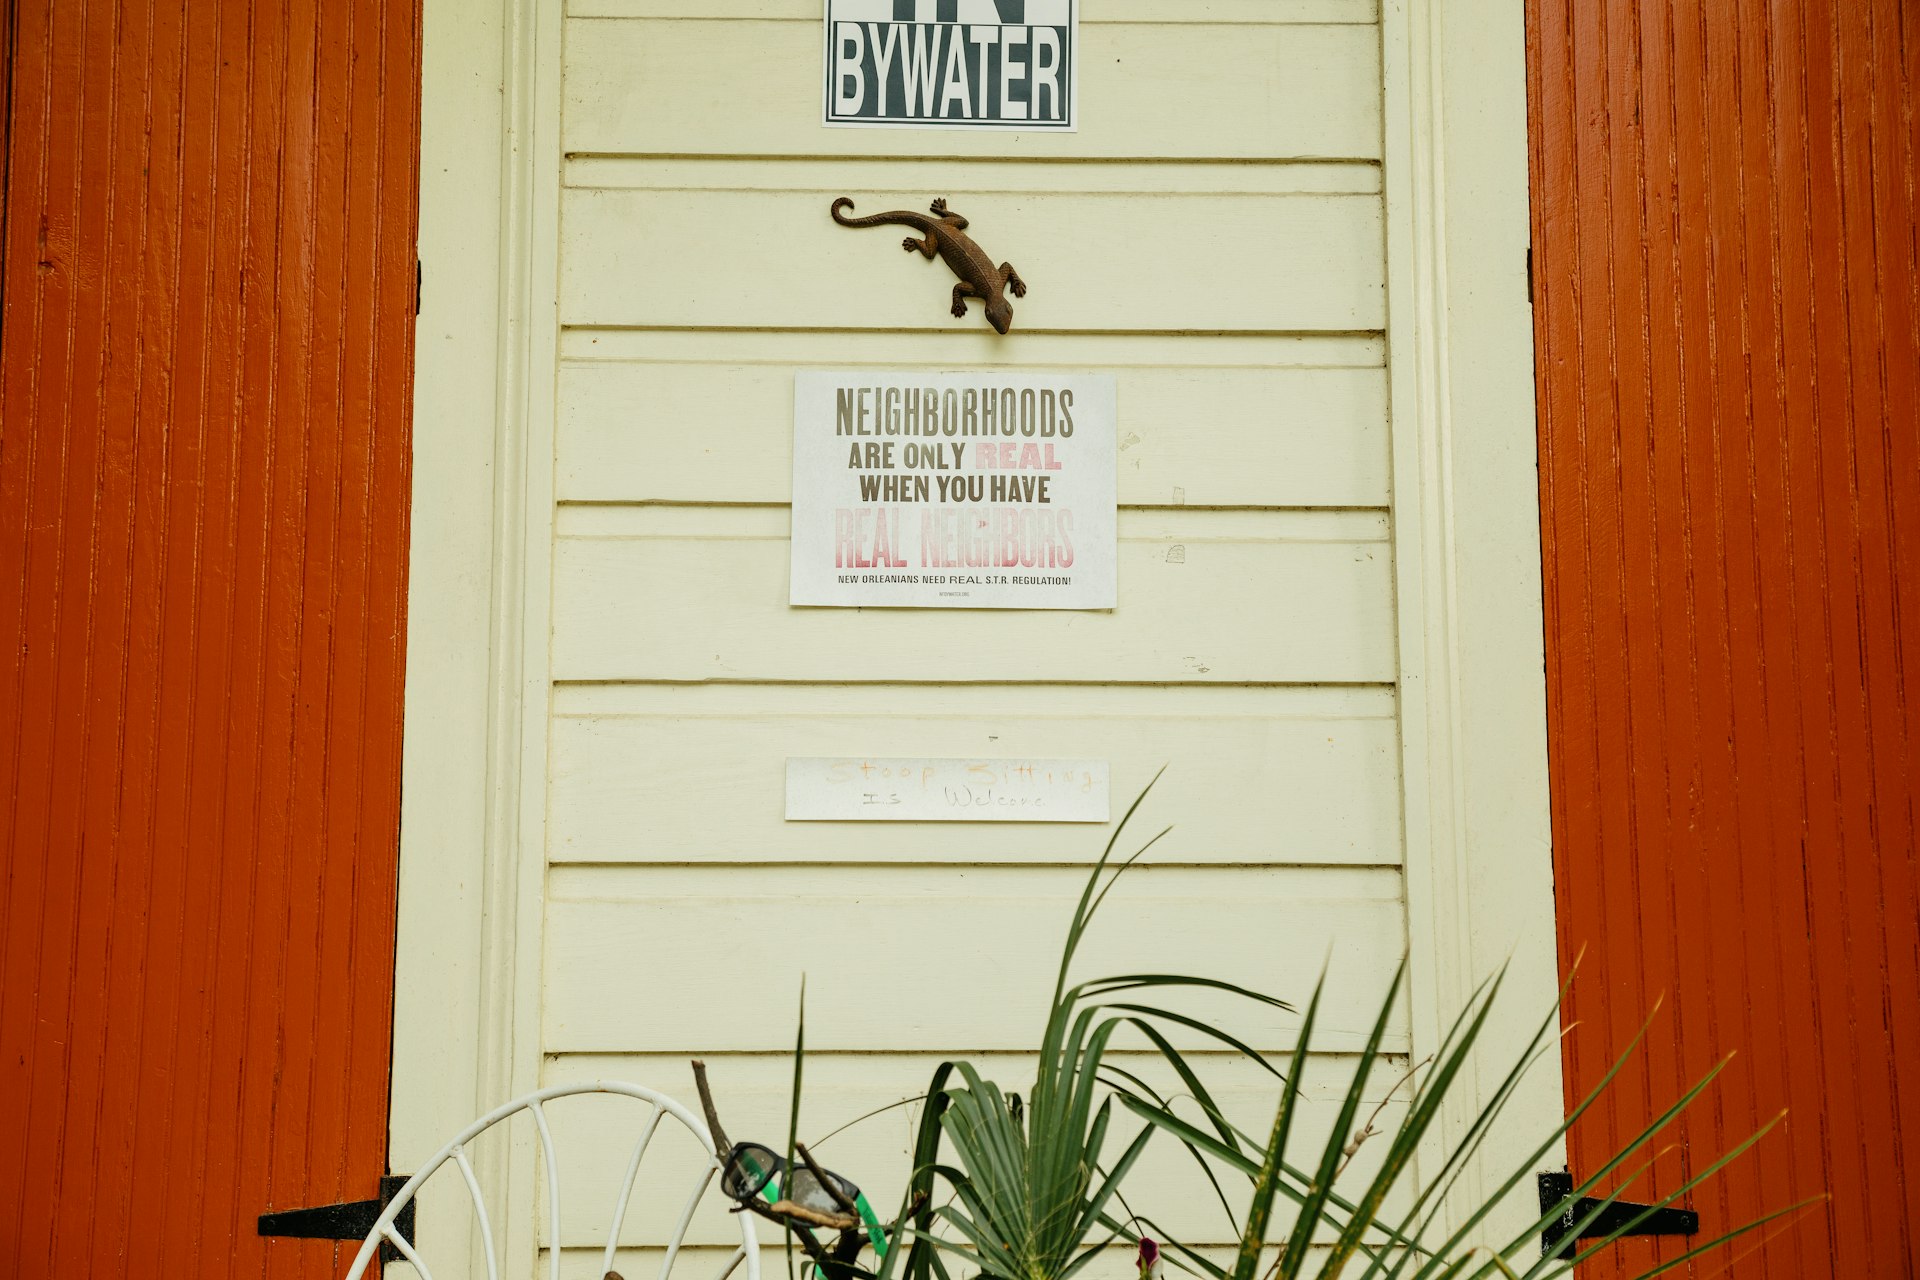 A sign on a house in the Bywater neighborhood addresses the short-term rental crisis